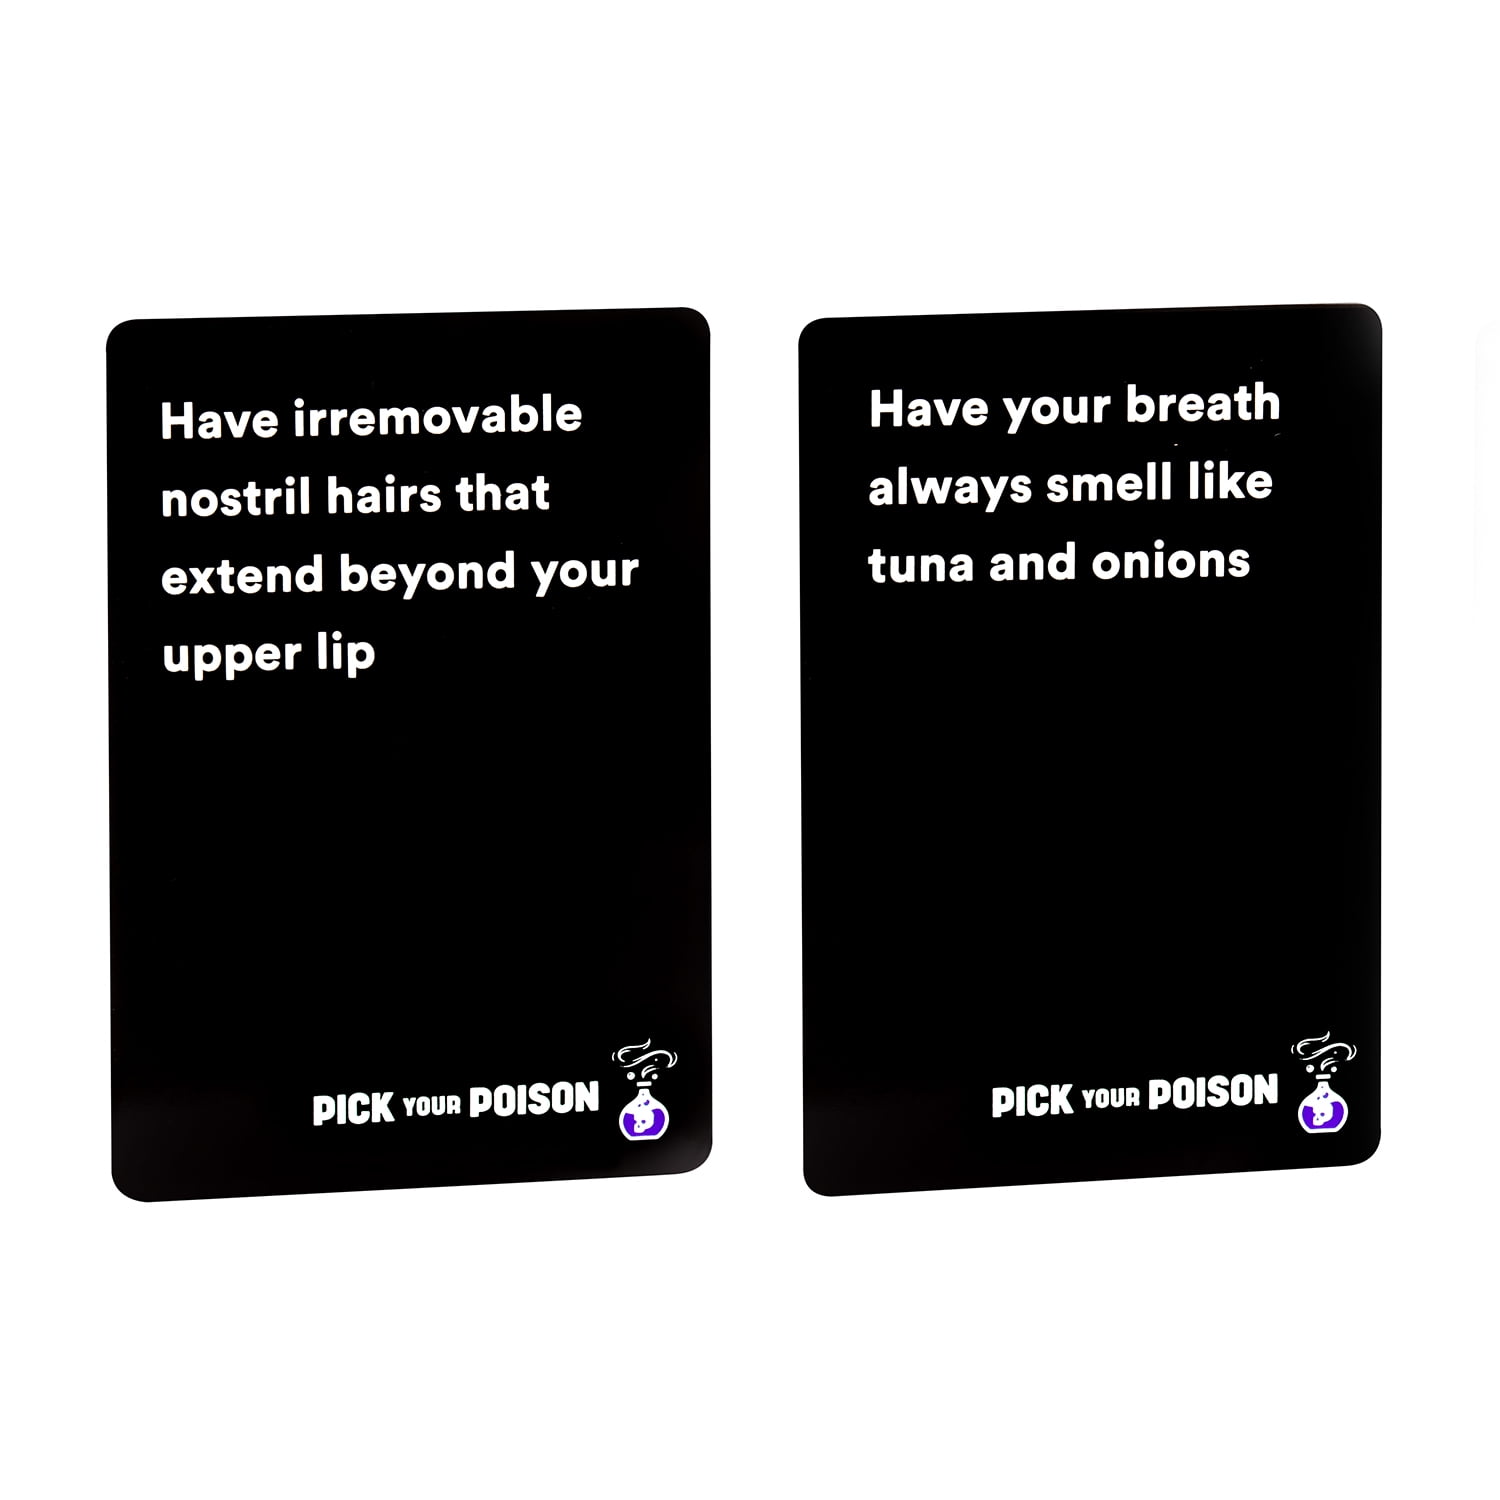 The “What Would You Rather Do? Party Game Pick Your Poison Card Game Expansion 